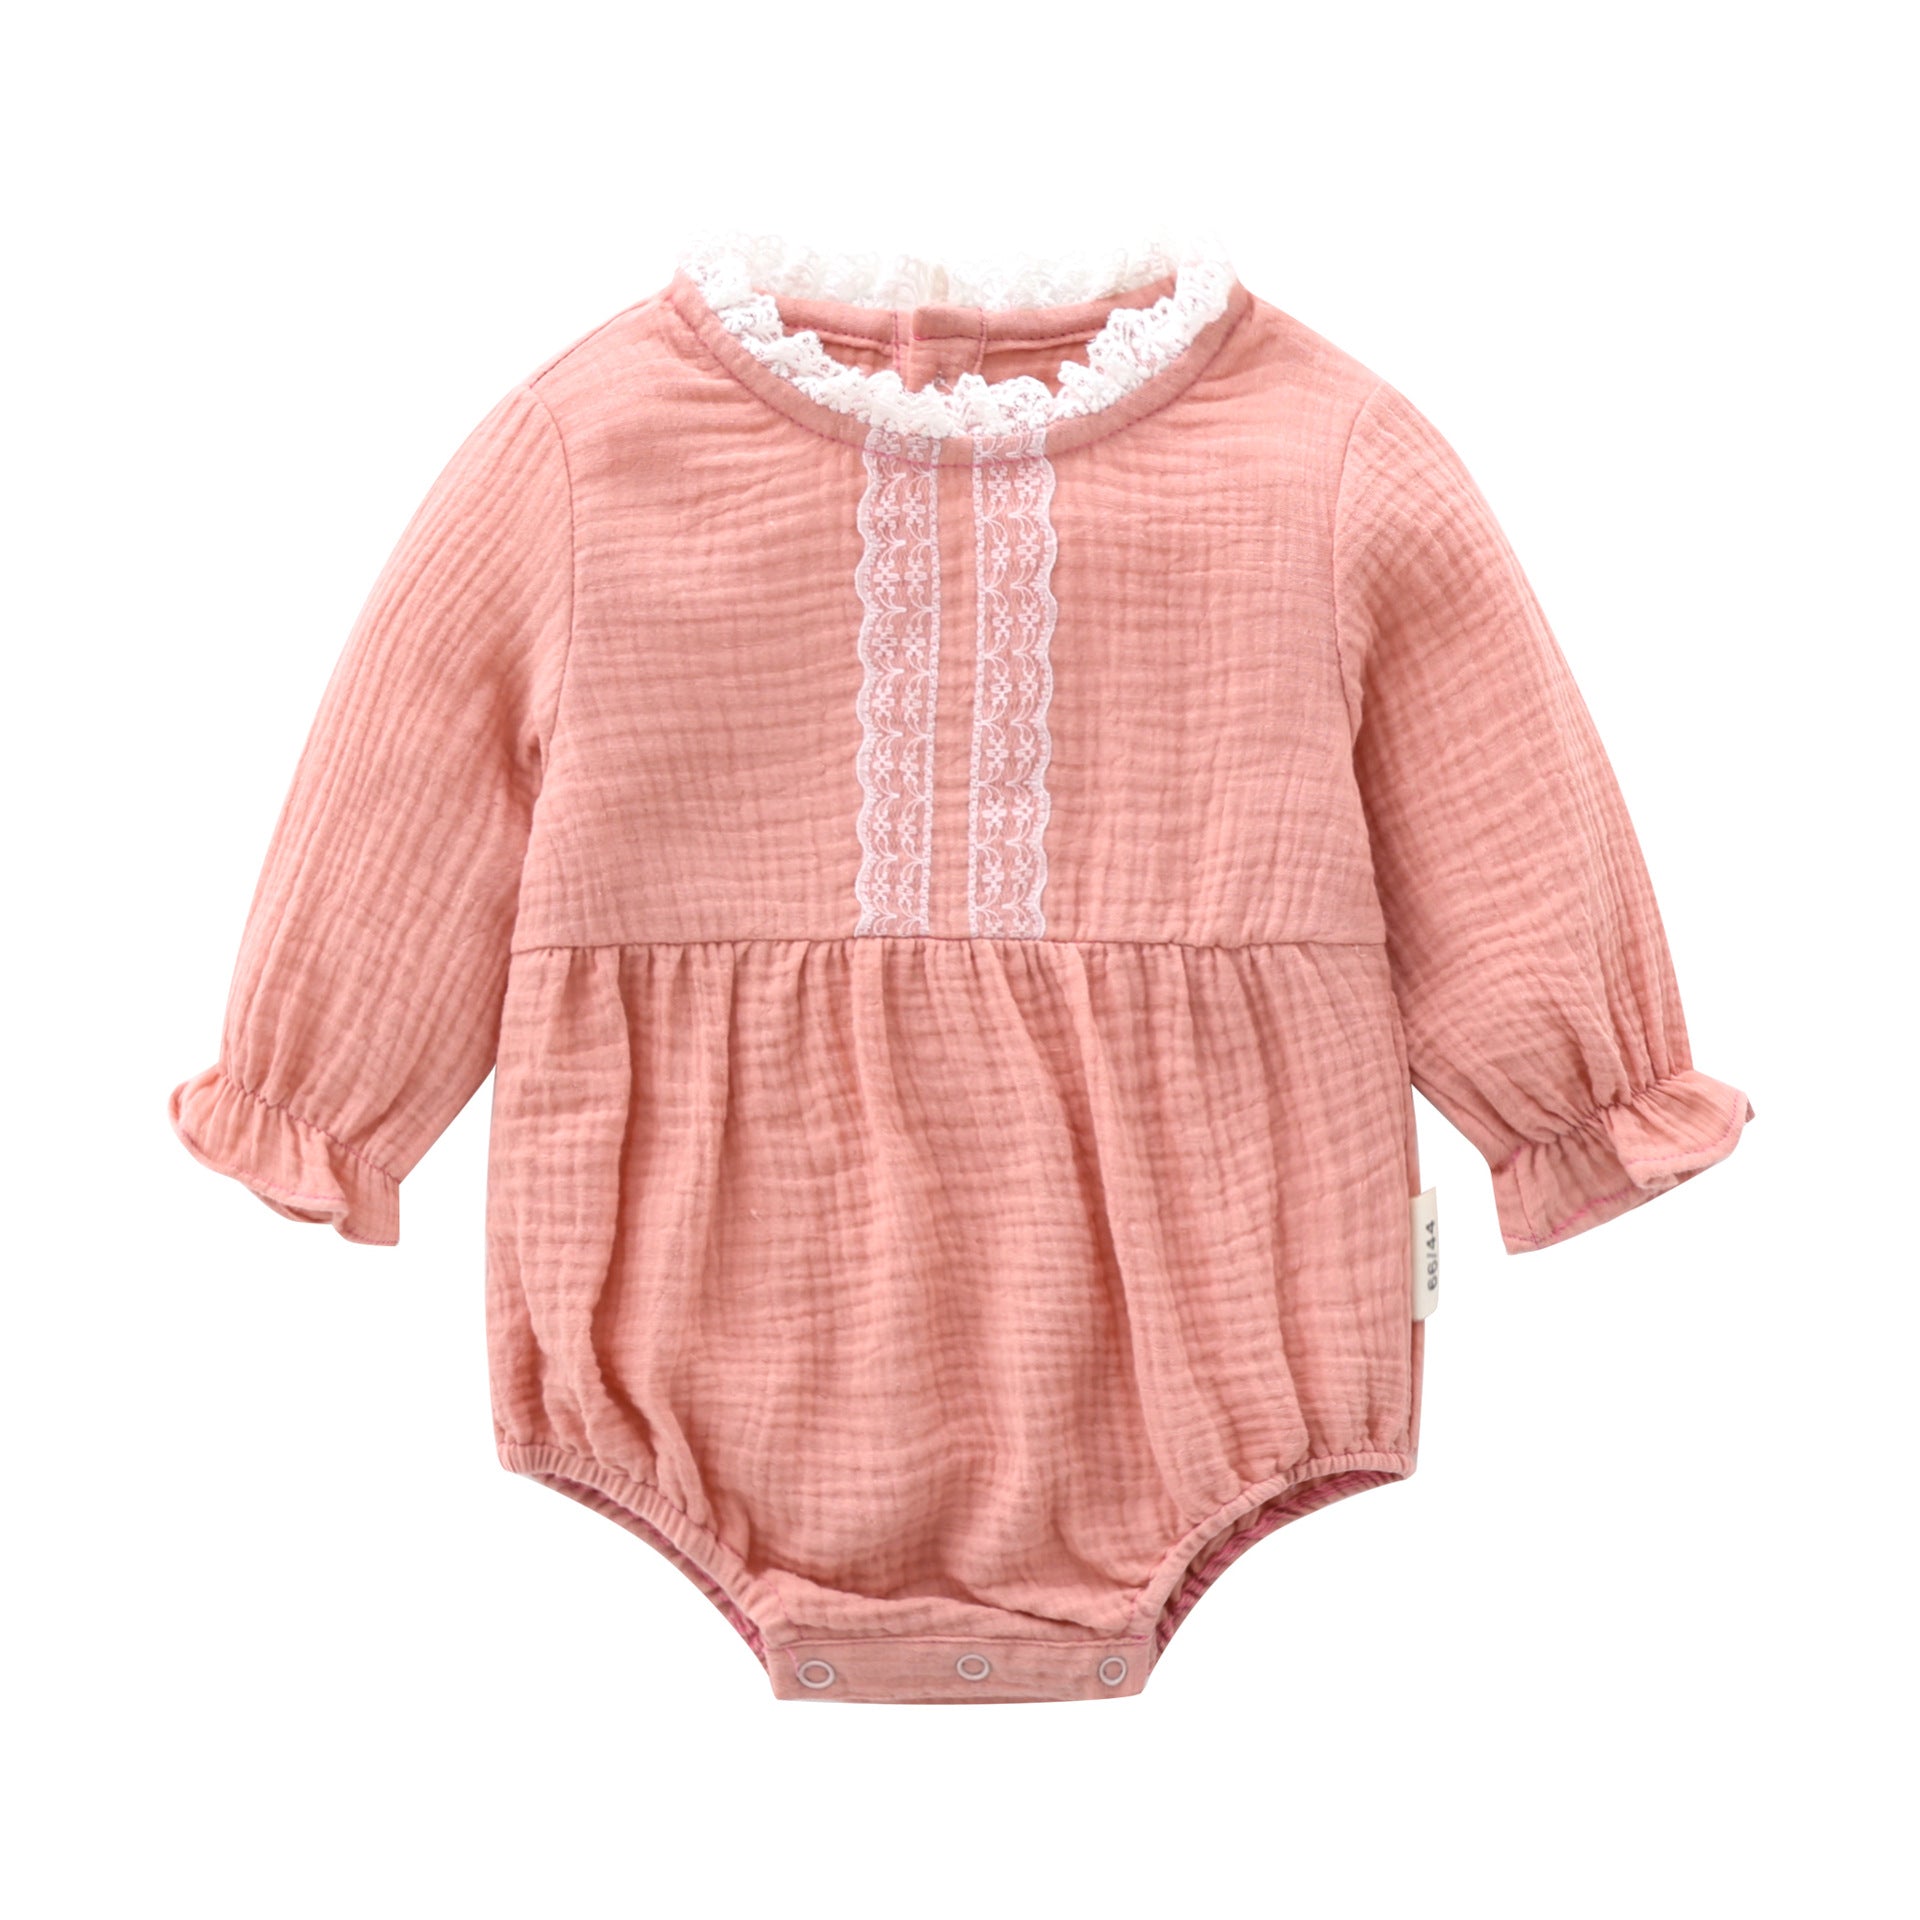 Baby Girl 1pcs Mesh Patchwork Design Solid Color Princess Style Onesies Bodysuit My Kids-USA